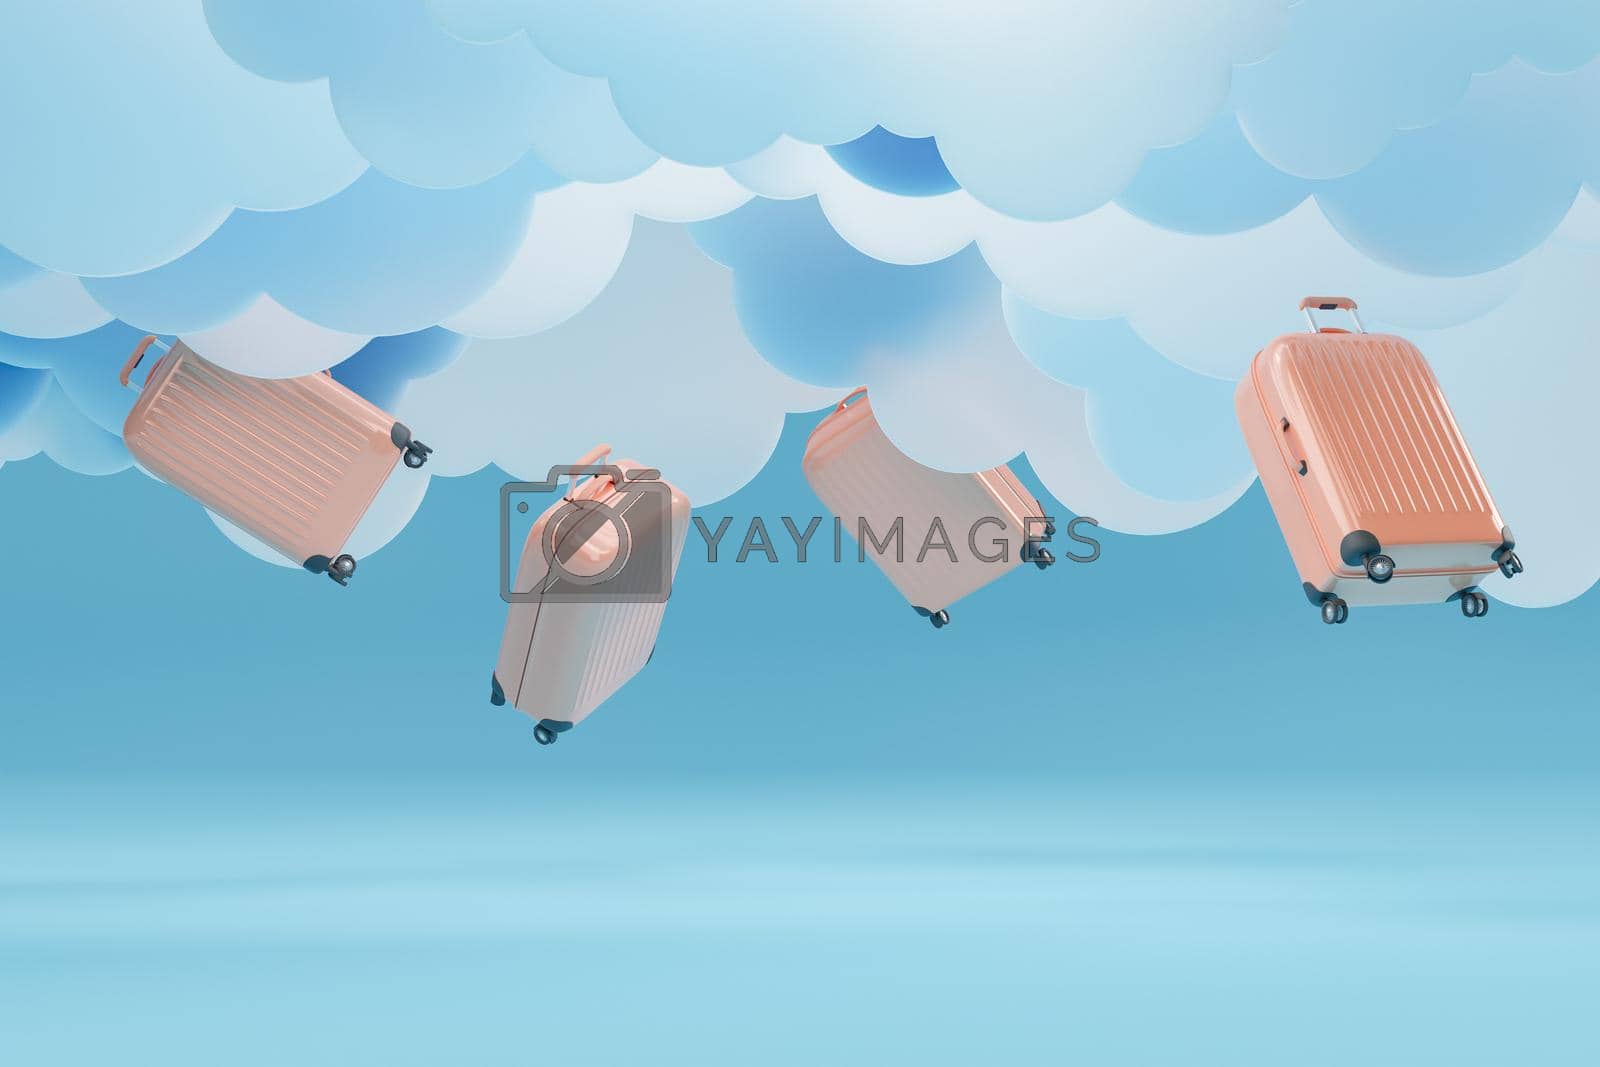 Royalty free image of travel suitcases falling from artificial clouds by asolano